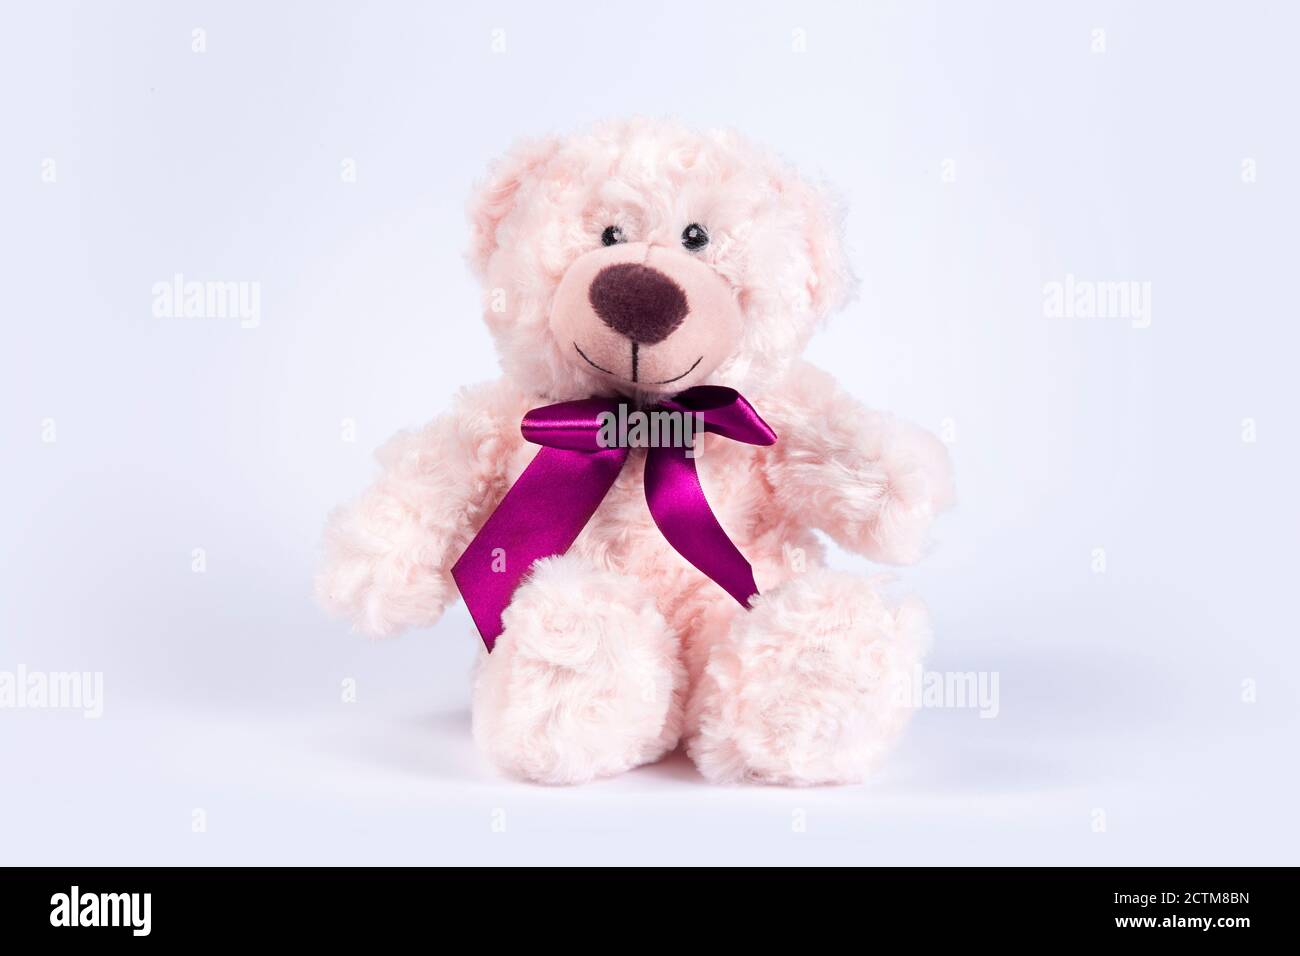 Teddy bear furry toy for kids isolated on white background. Cheerful posotive romantic bear. Stock Photo